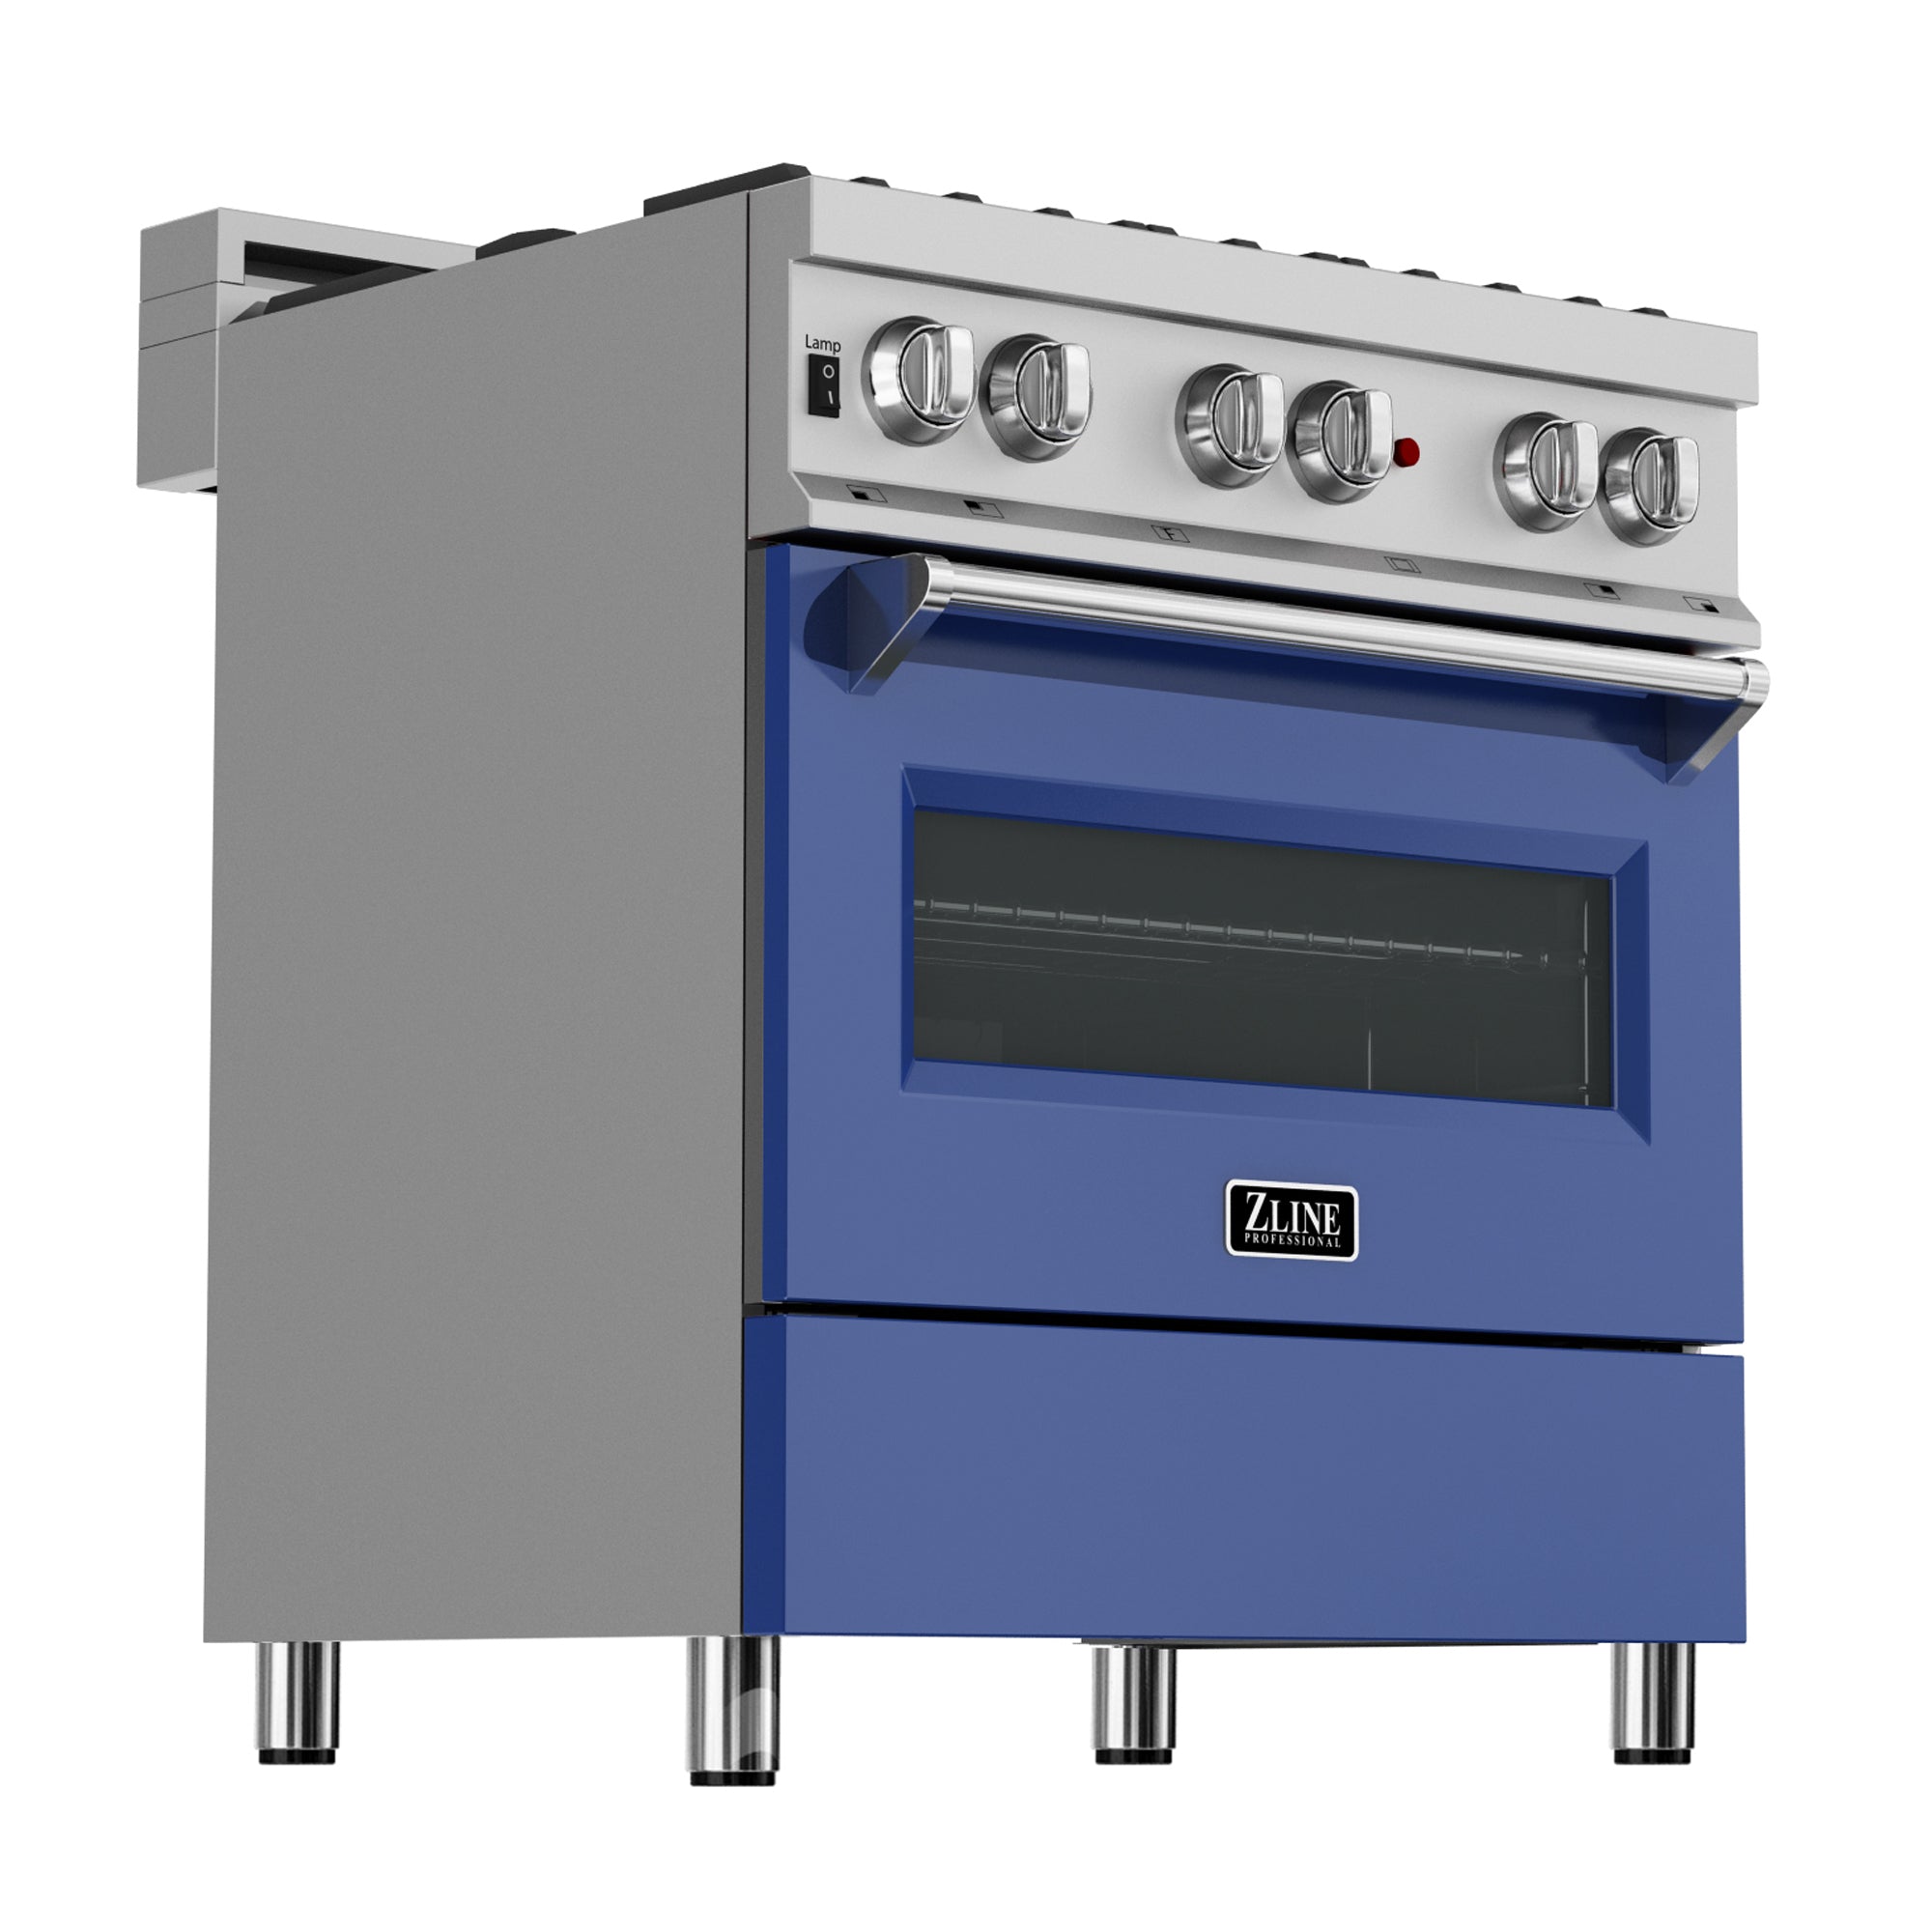 ZLINE 30" 4.0 cu. ft. Dual Fuel Range with Gas Stove and Electric Oven in Fingerprint Resistant Stainless Steel and Blue Matte Door (RAS-BM-30)